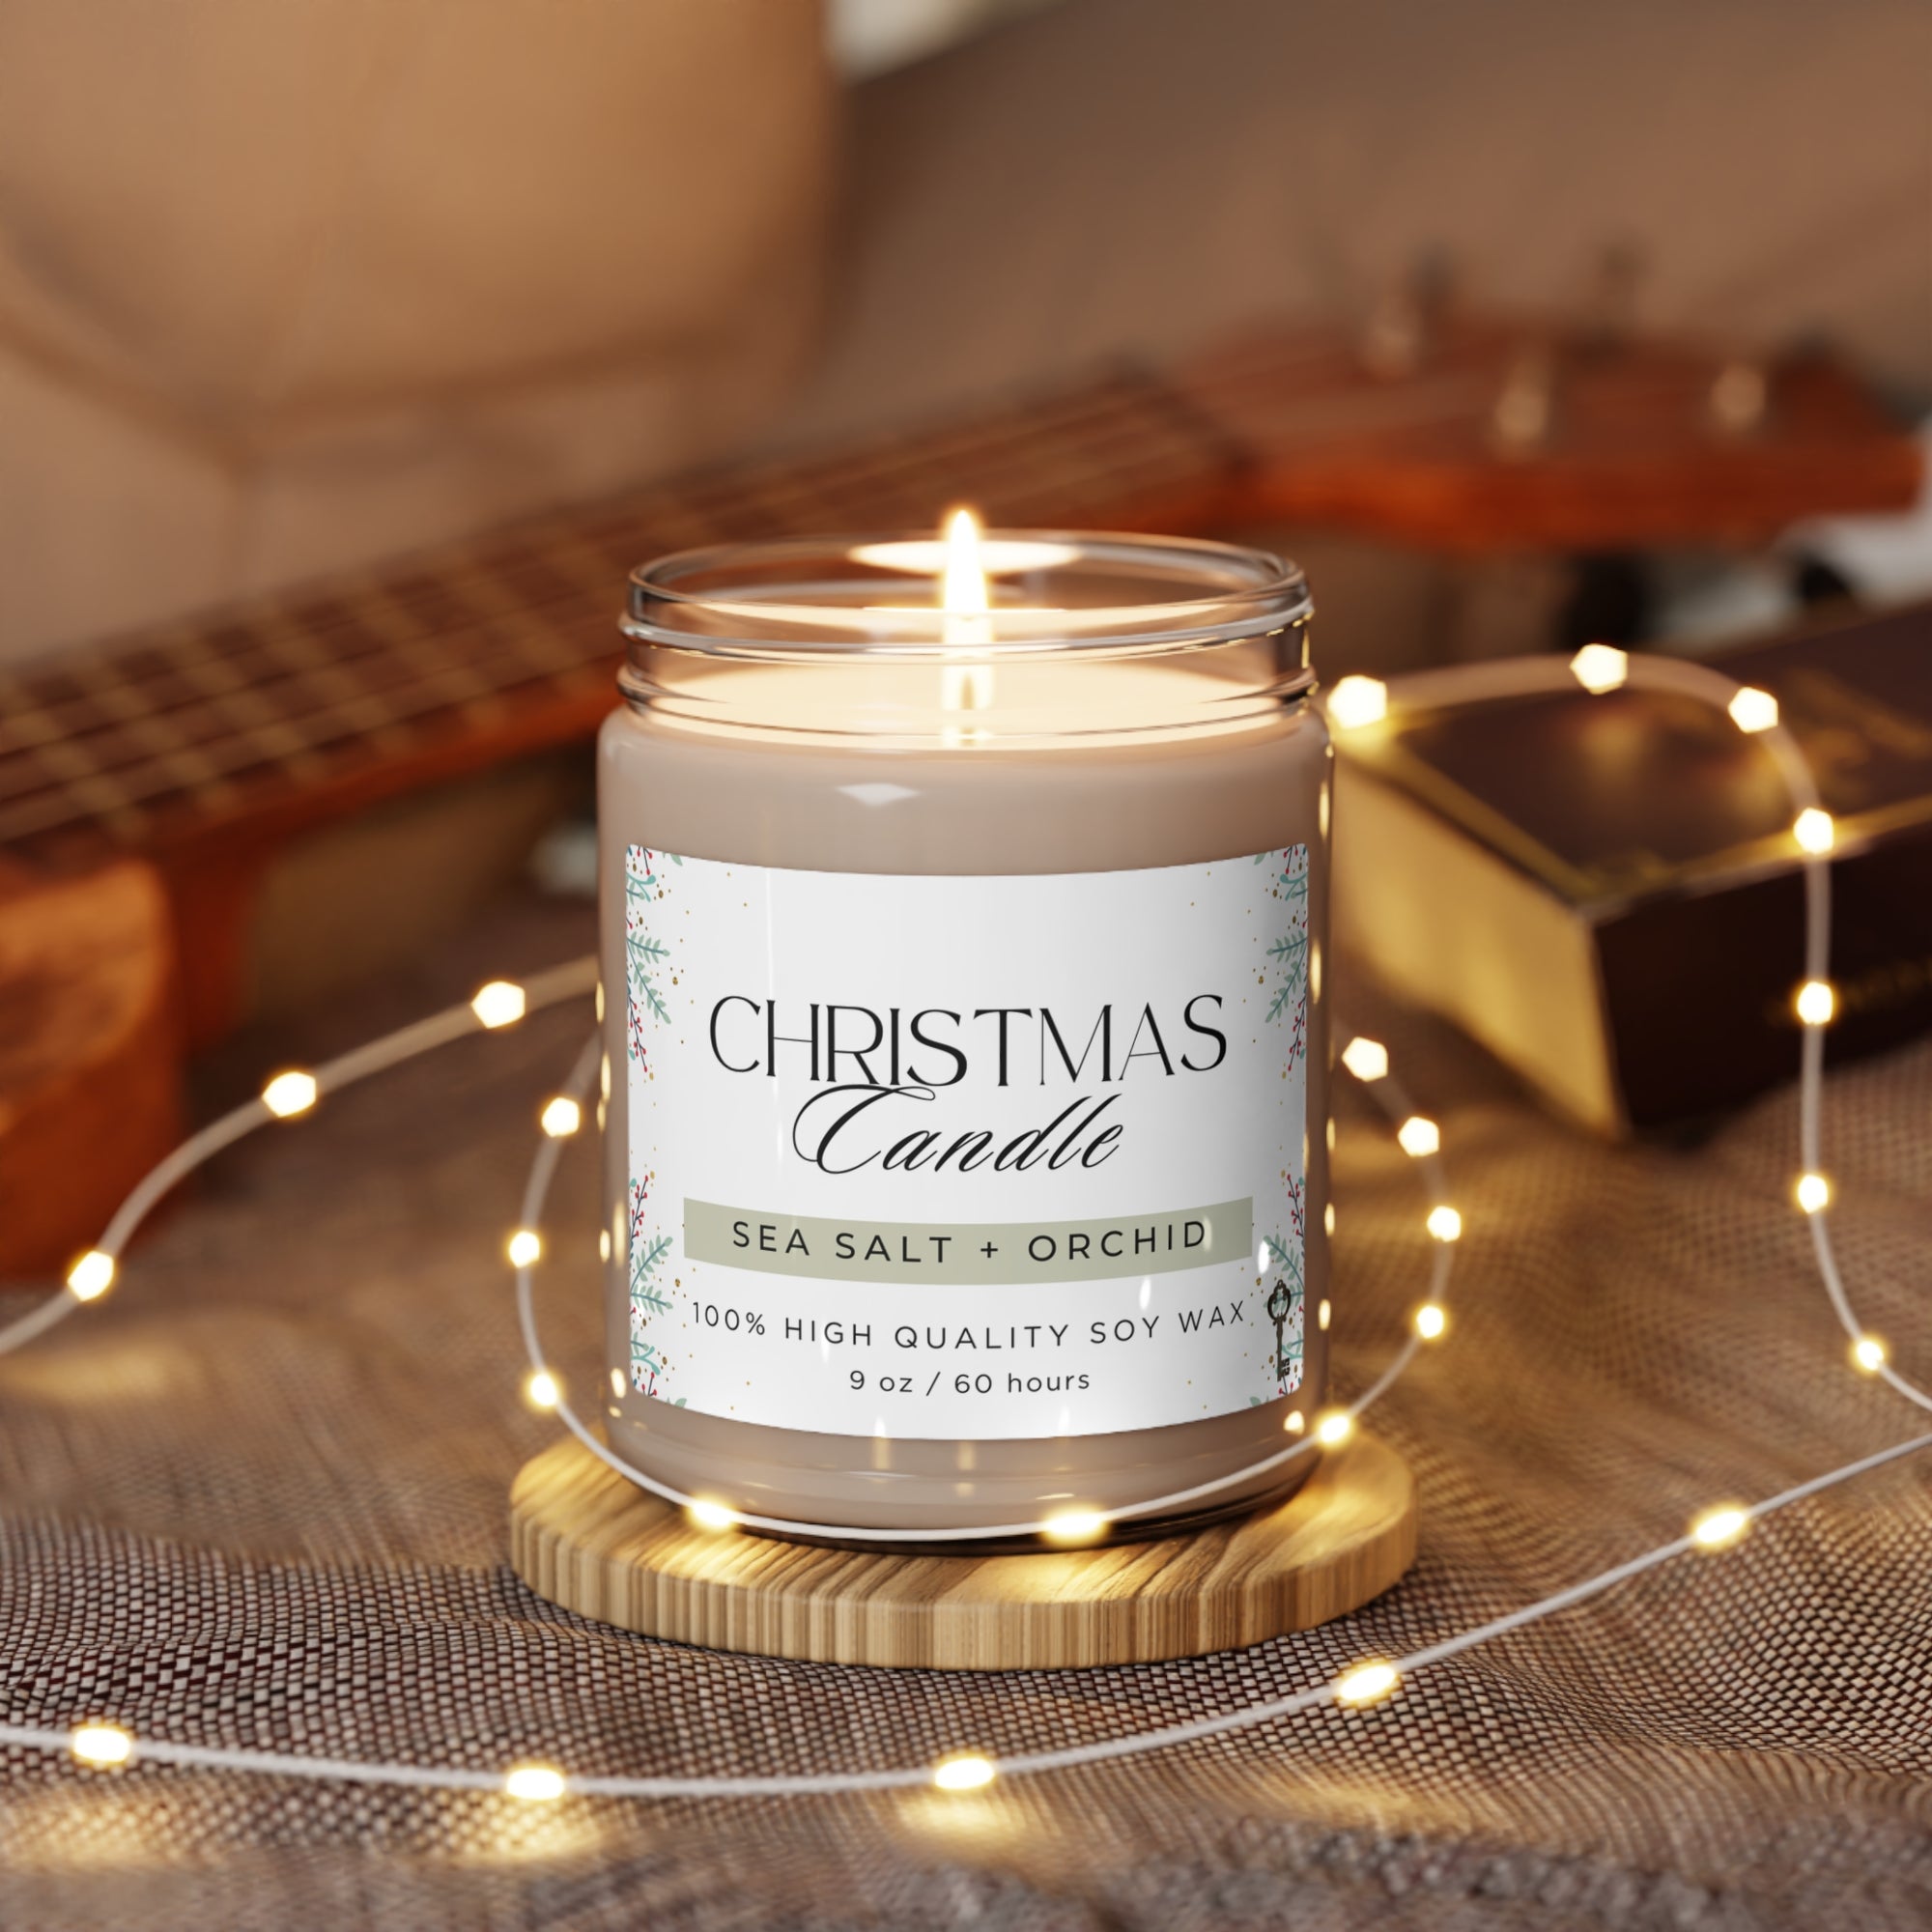 Christmas Soy Candles